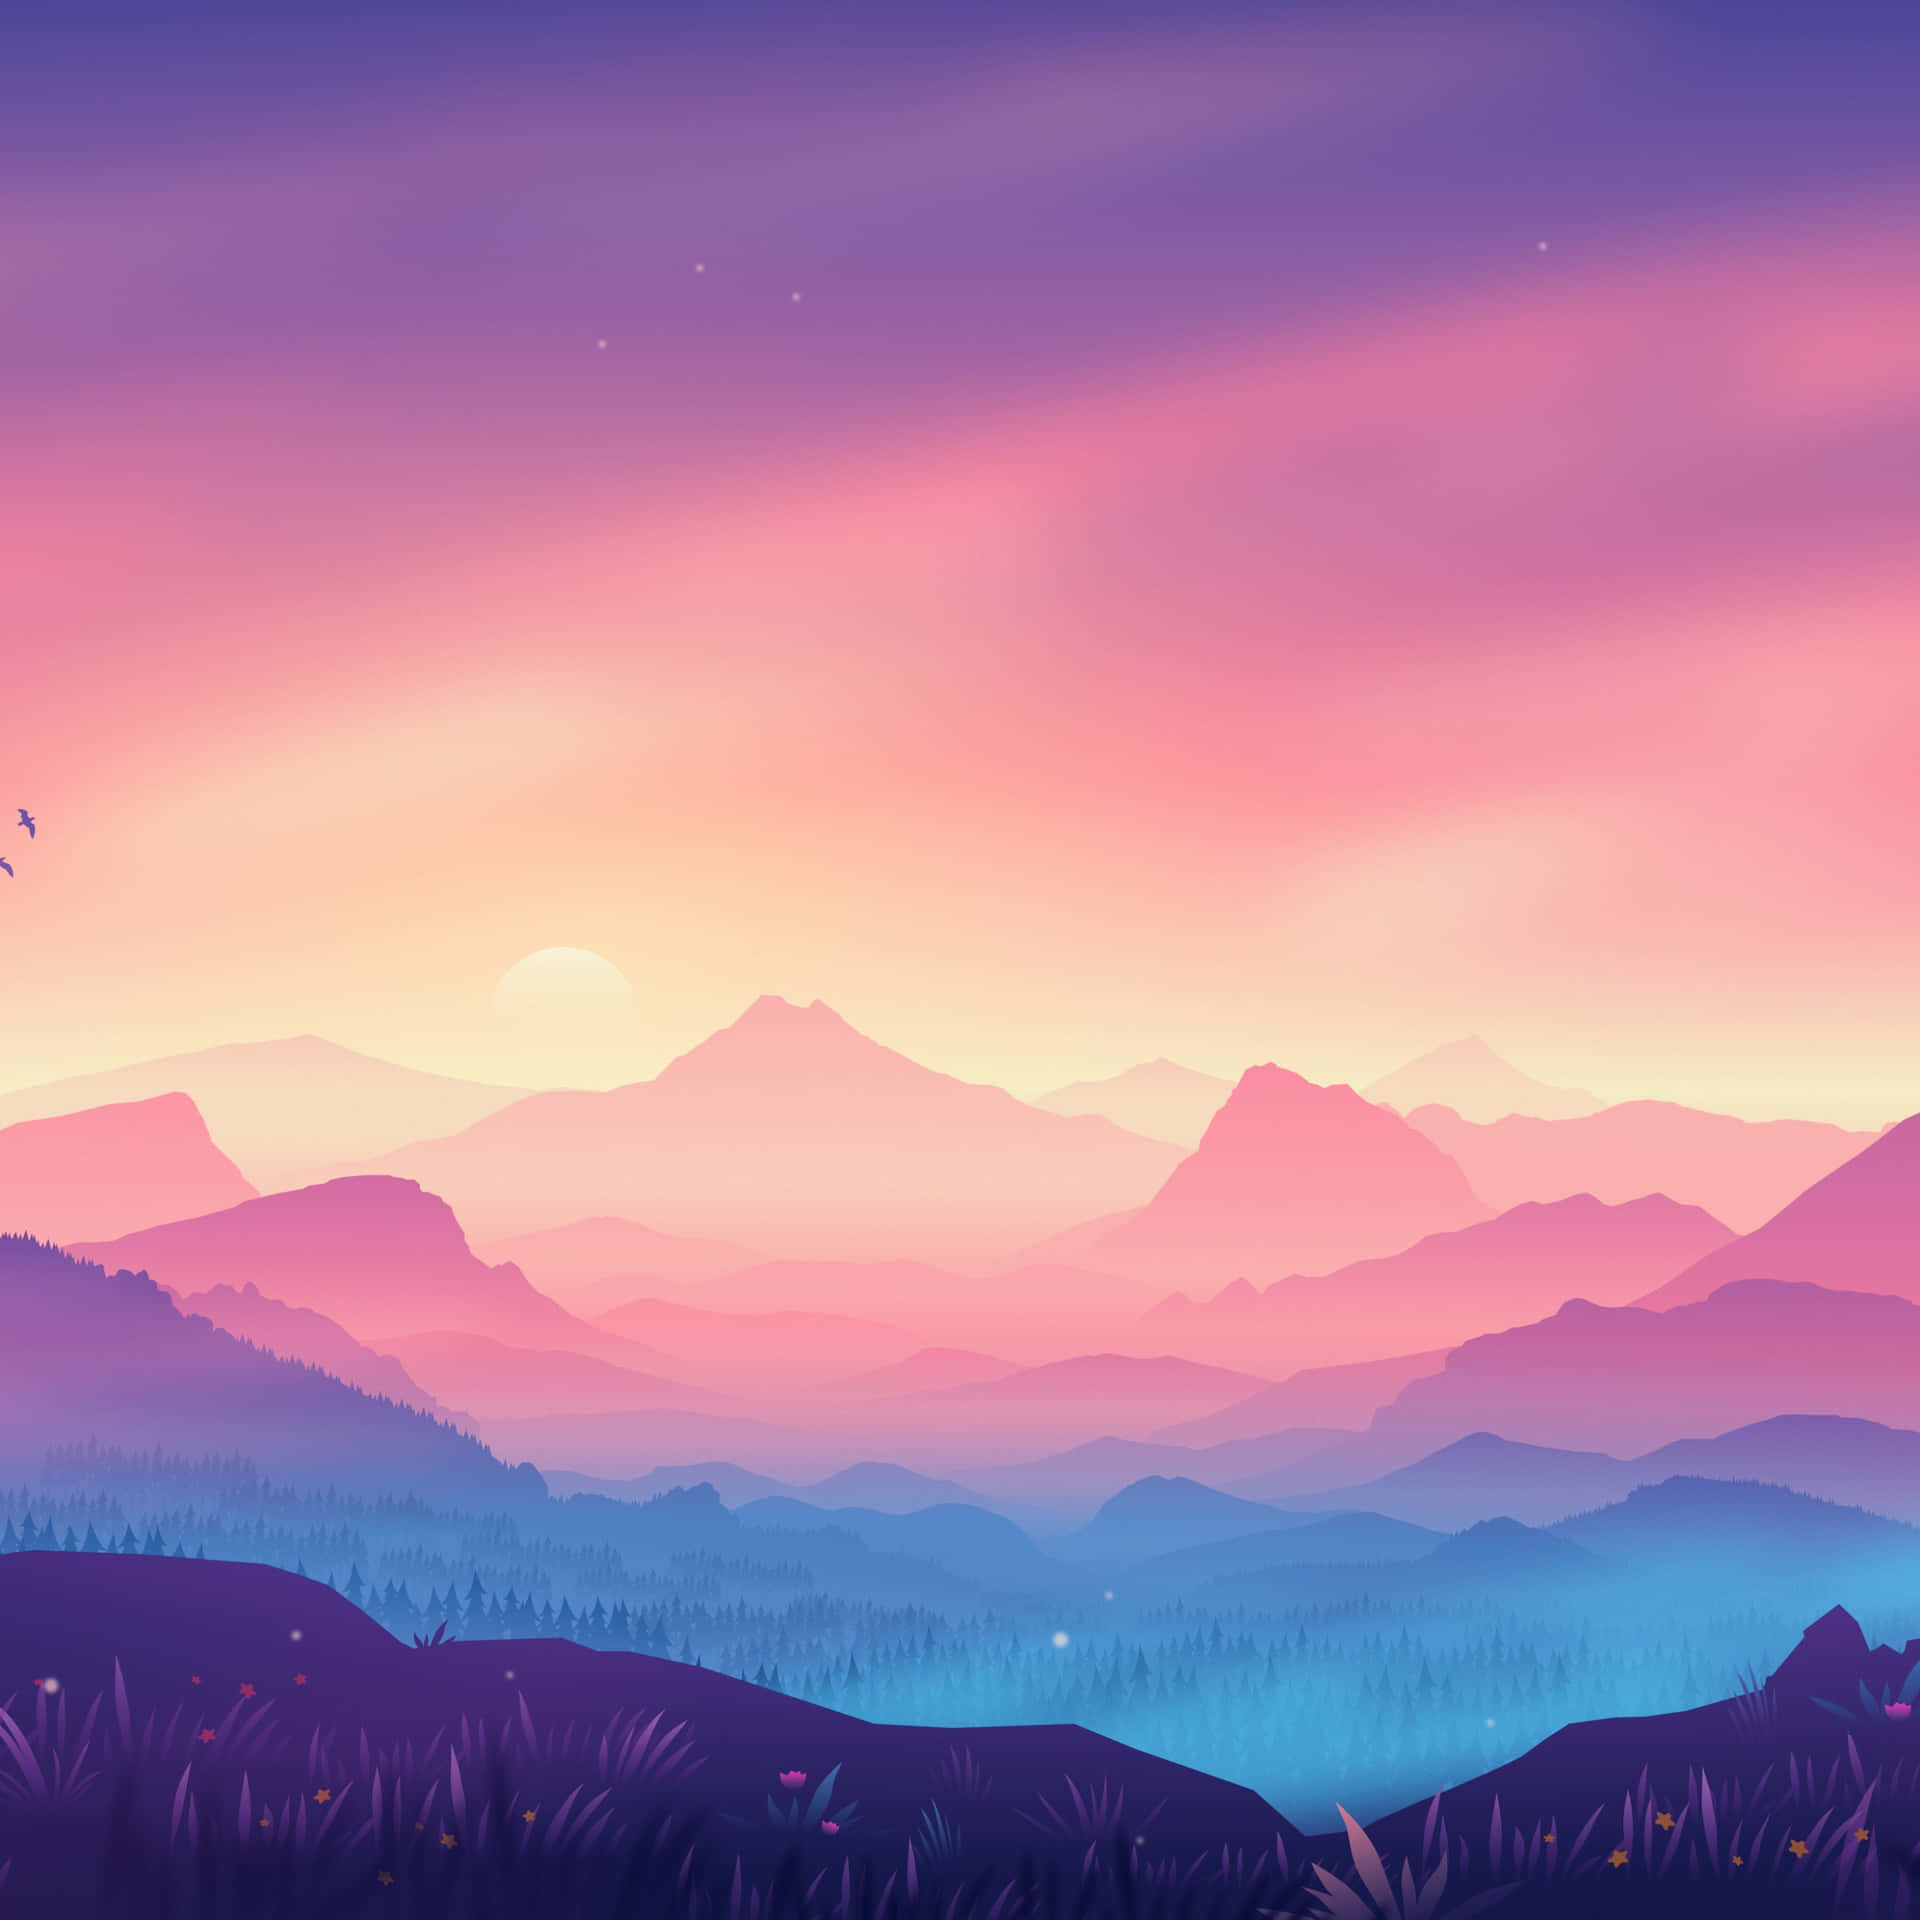 A Colorful Landscape With Mountains And Birds